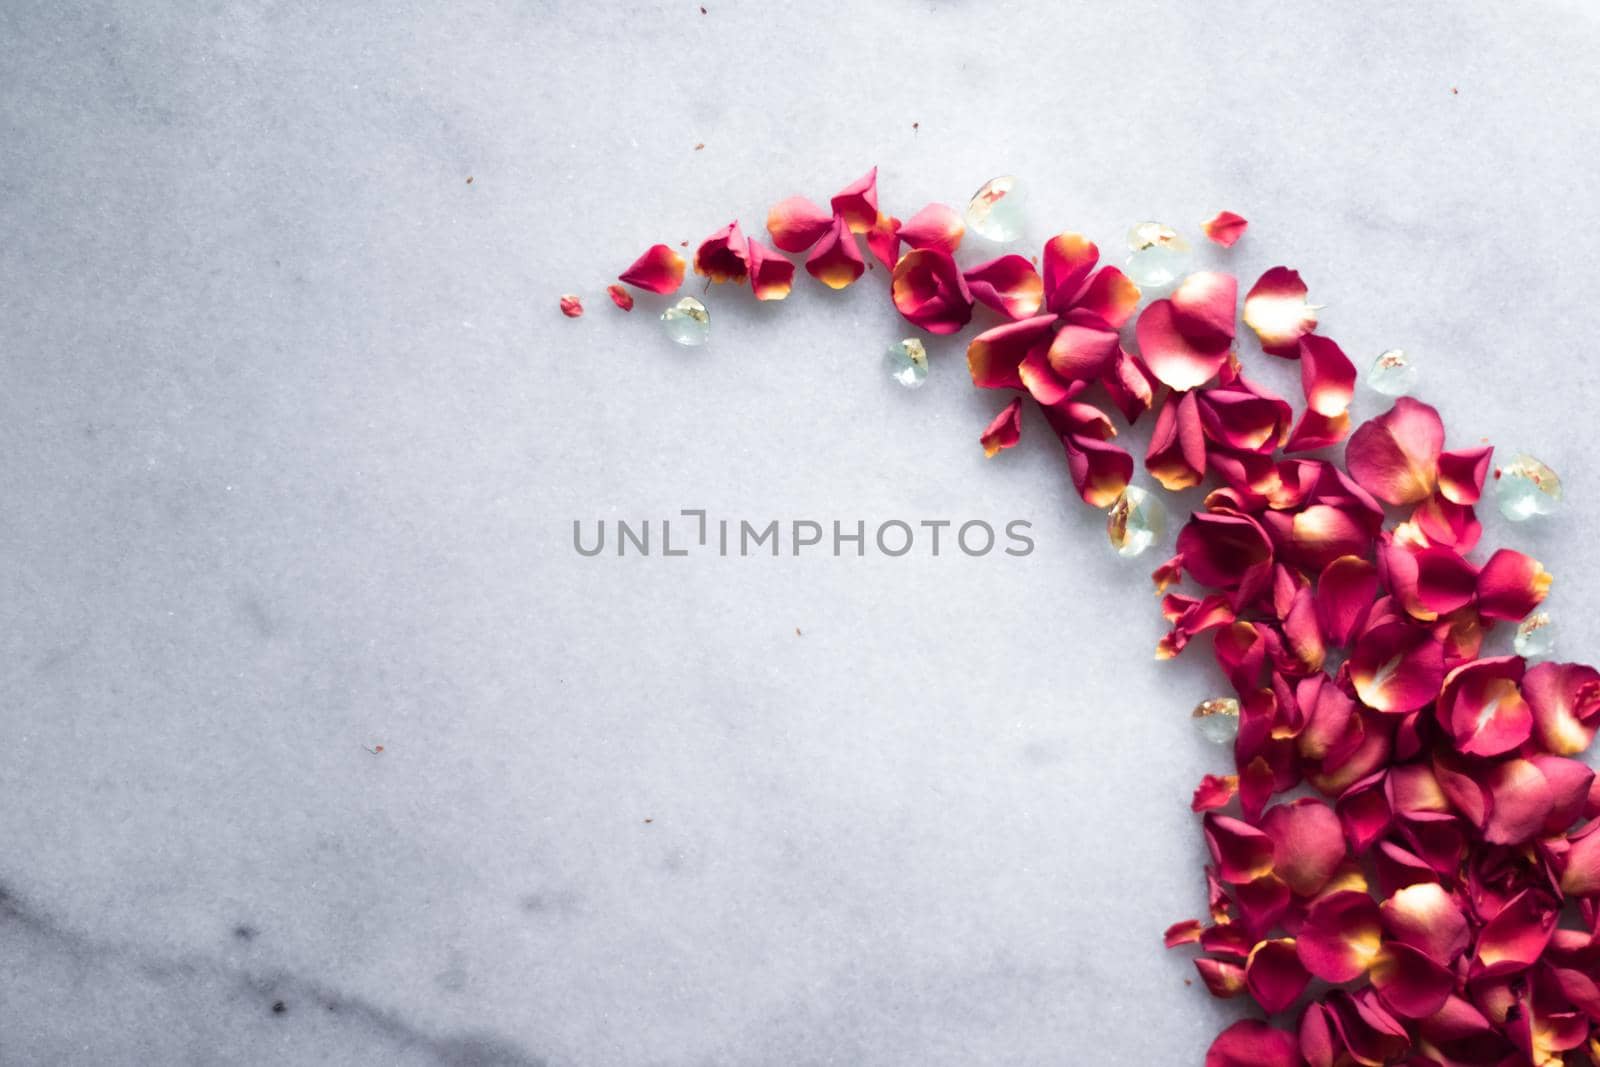 rose petals on marble flatlay - wedding, holiday and floral background styled concept, elegant visuals